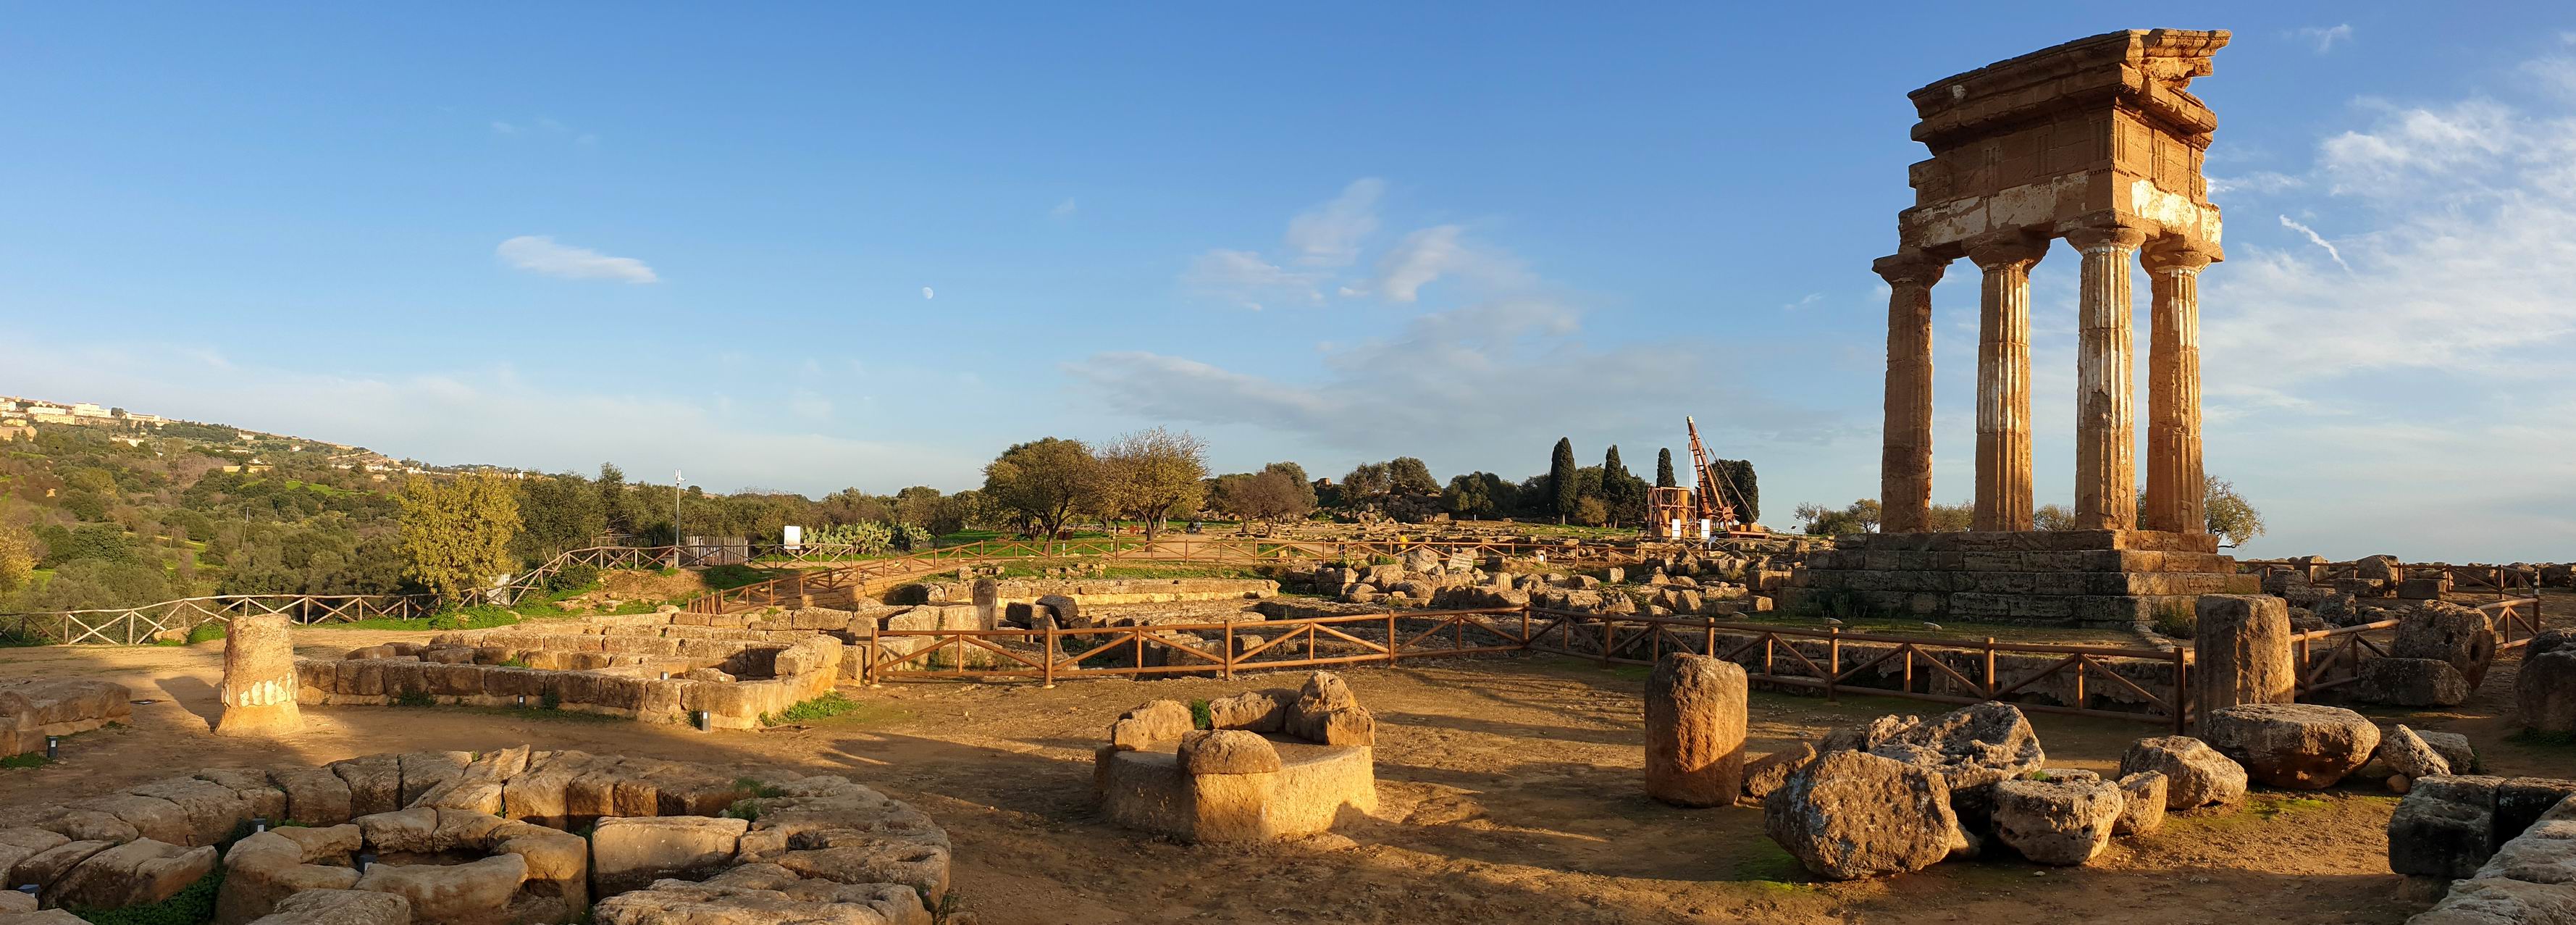 Valley_Temples_Agrigento_Walking_Tour.jpg